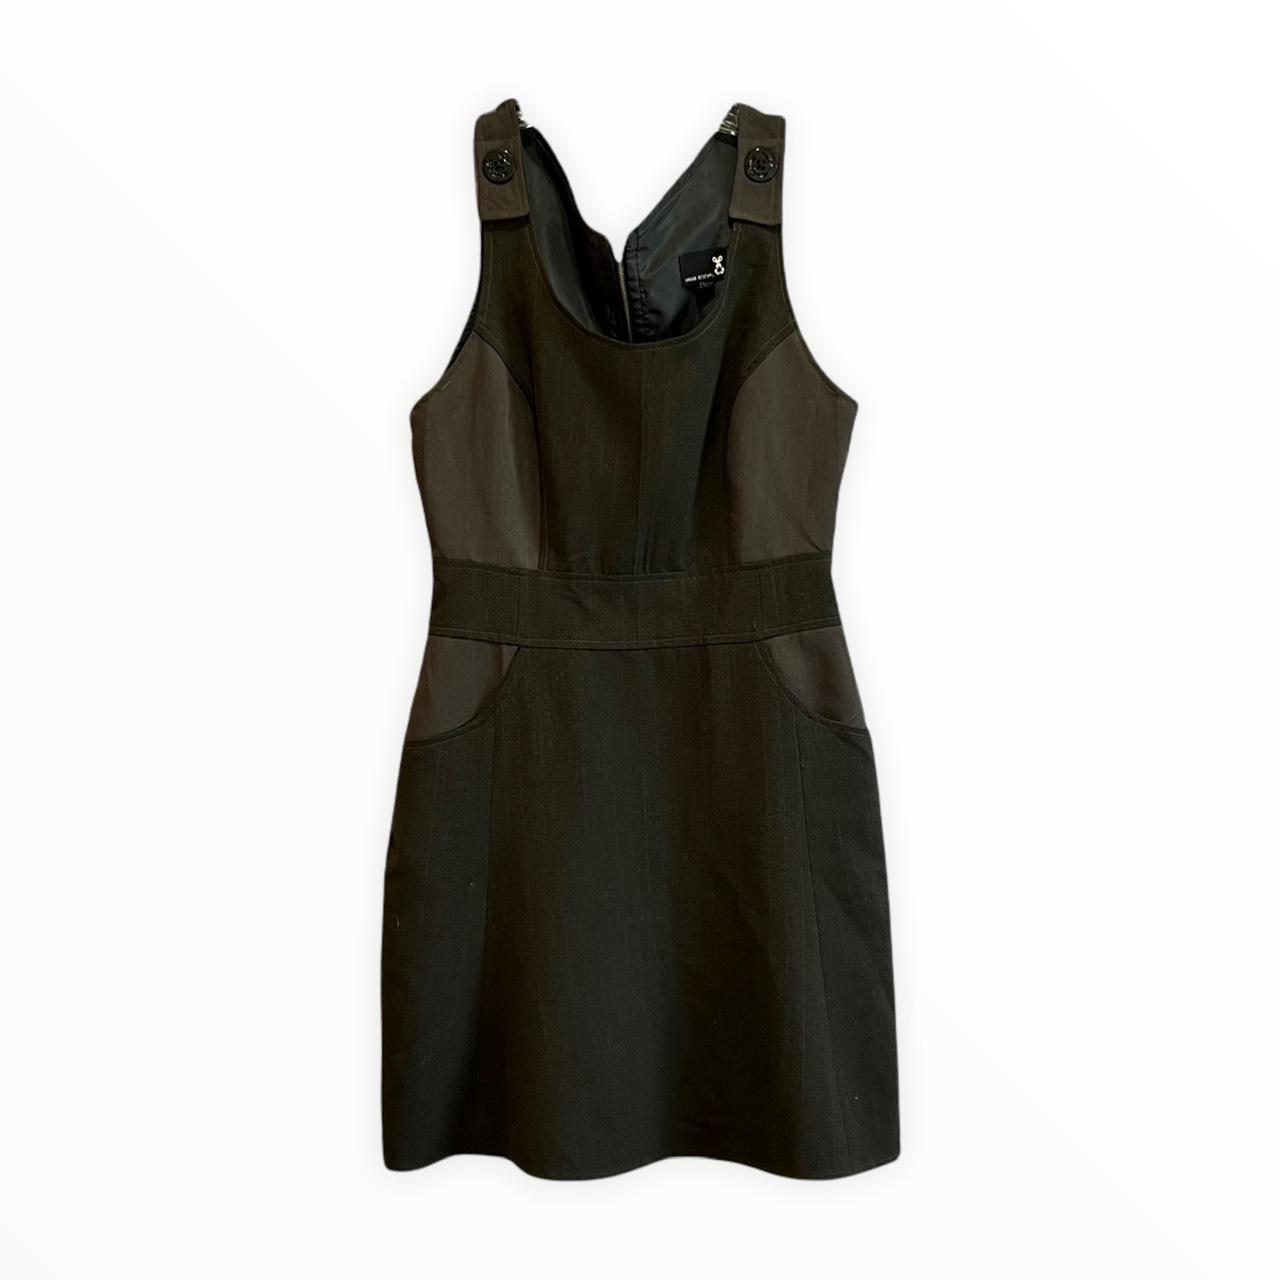 Urban Outfitters Women's Brown Dress